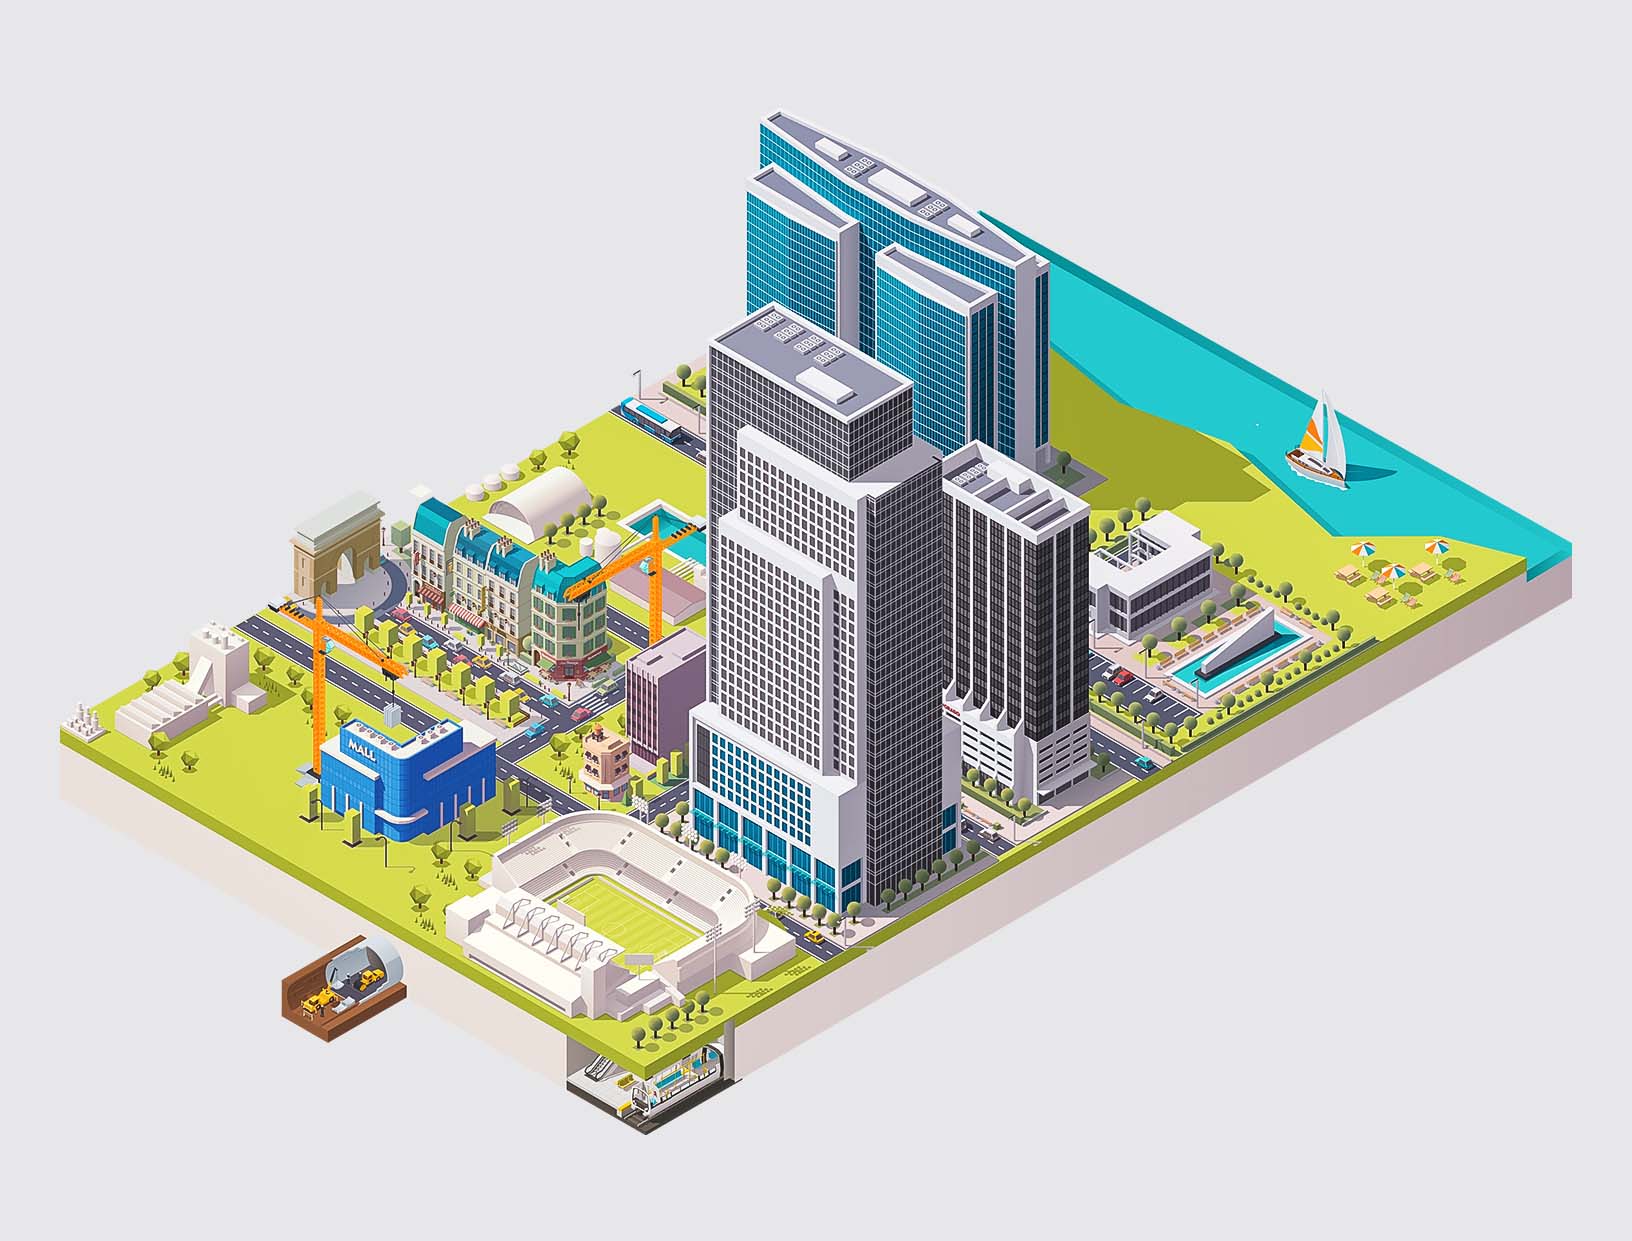 illustration of an urban area with high-rise buildings and construction sites